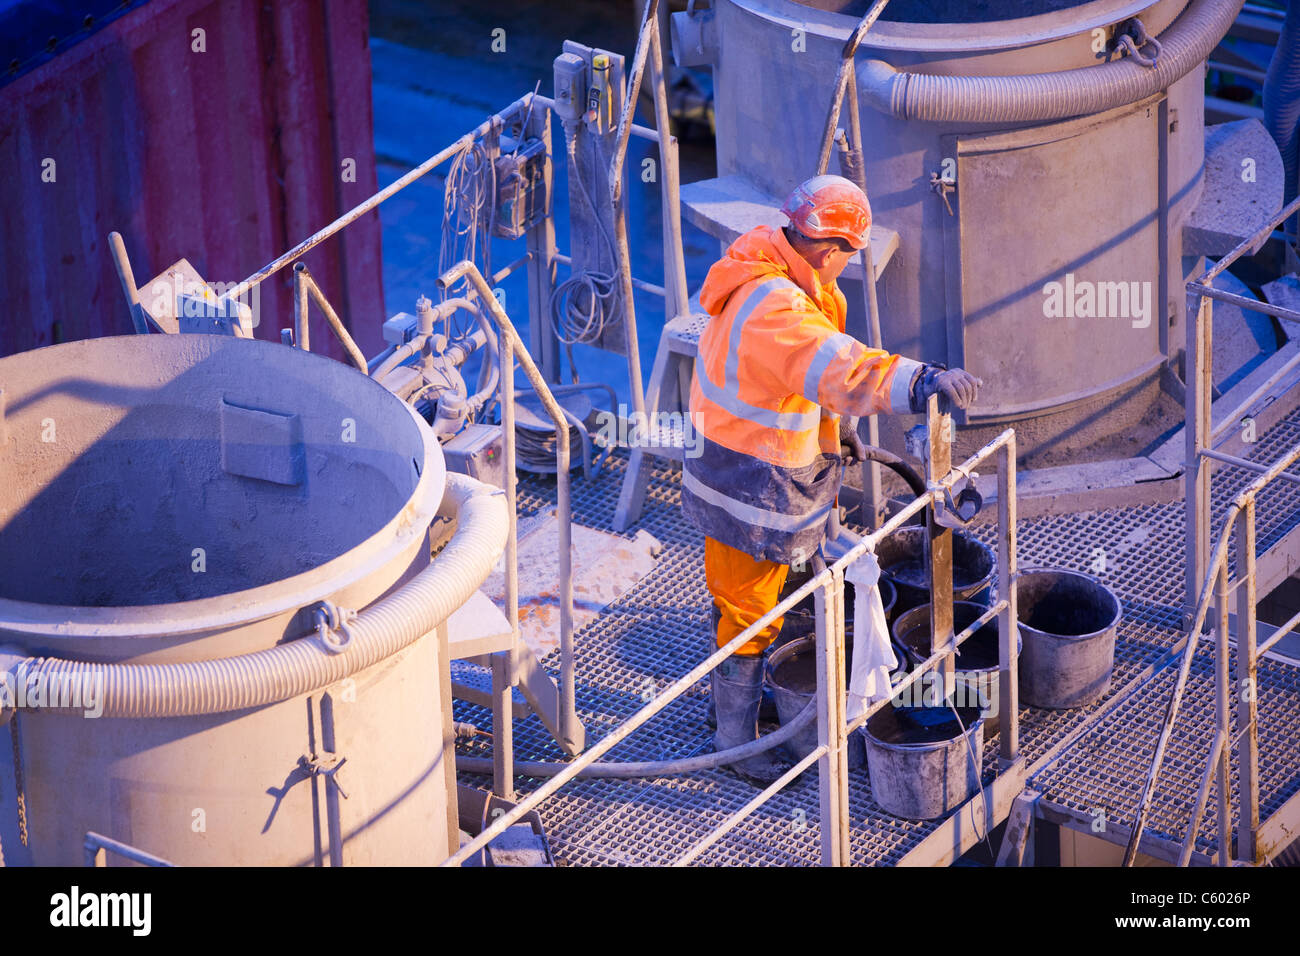 Mixing specialist grout to fix pieces of wind turbine into place on the Walney offshore wind farm, UK. Stock Photo